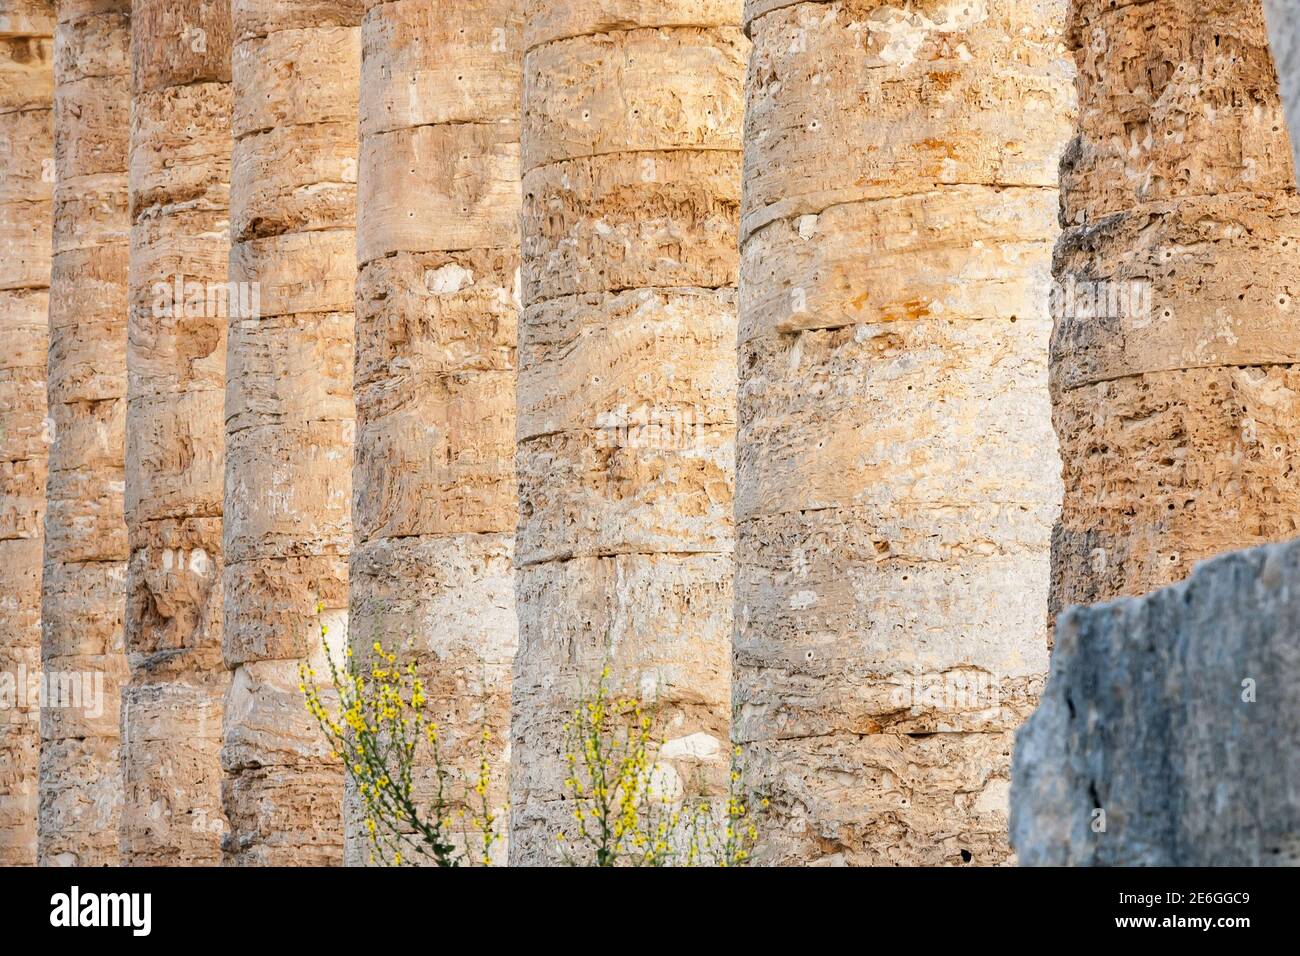 Columns of the Doric temple of Segesta in warm evening light, Sicily, Italy Stock Photo